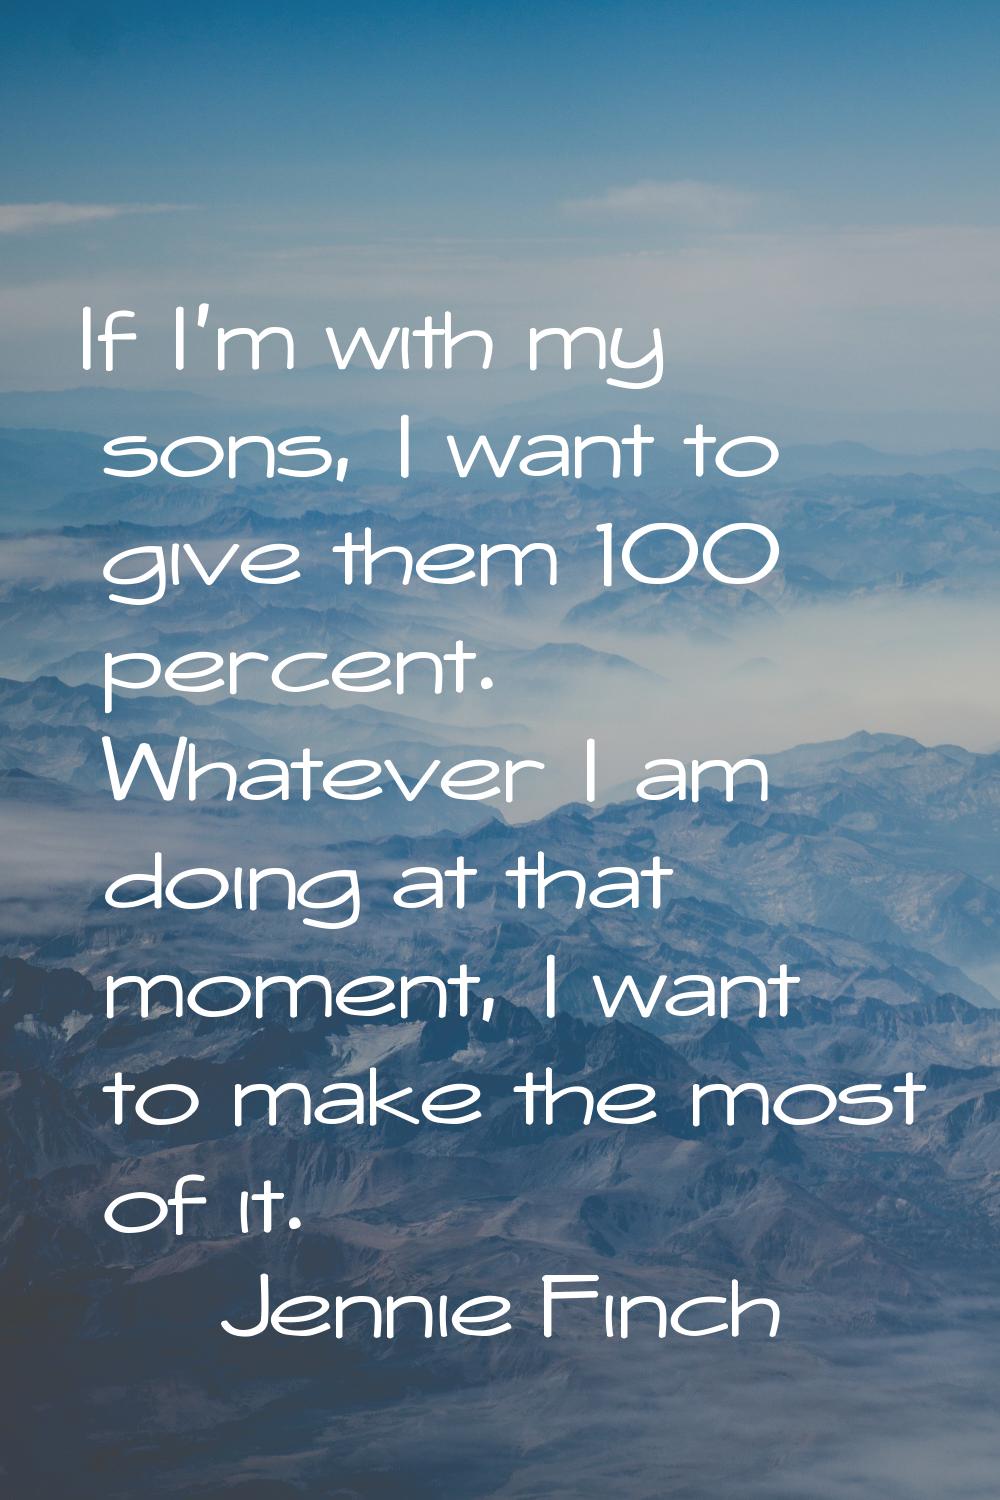 If I'm with my sons, I want to give them 100 percent. Whatever I am doing at that moment, I want to